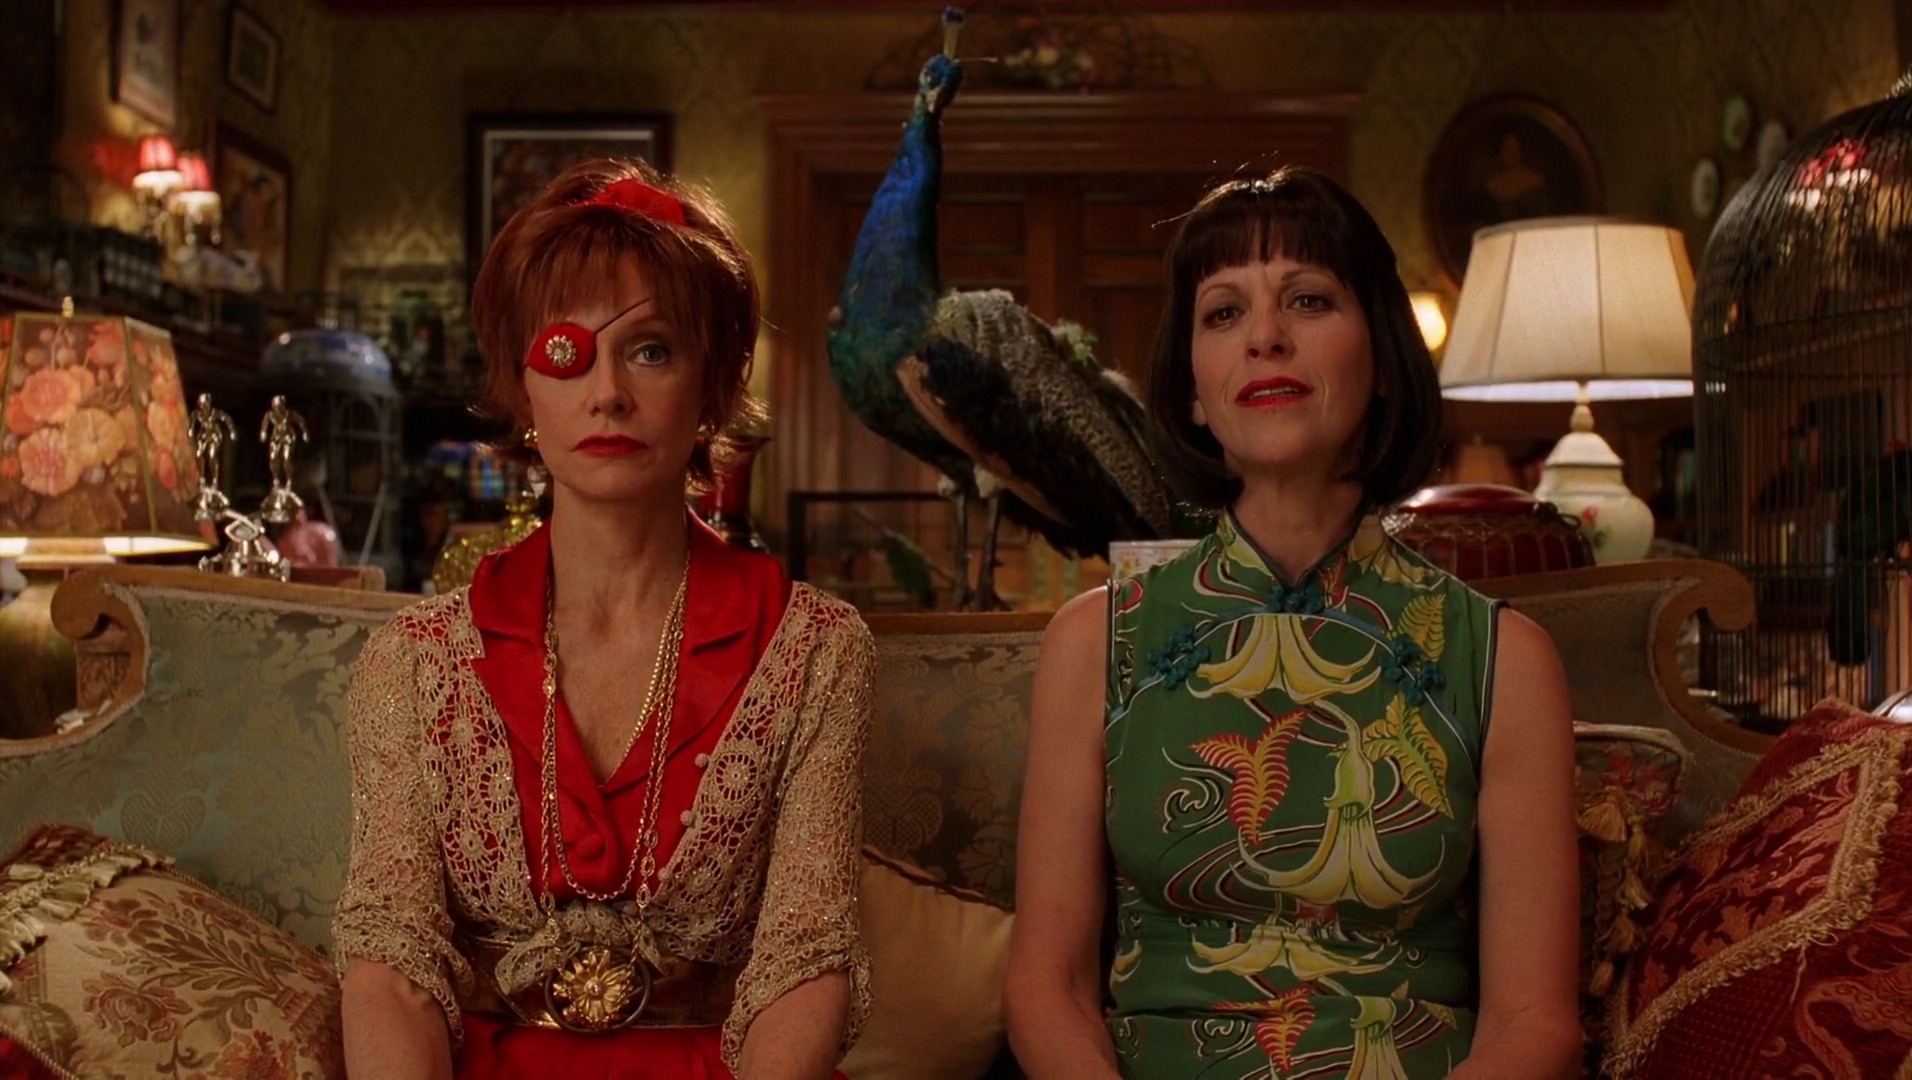 Lily (Swoosie Kurtz) and Vivian (Ellen Greene) are pictured sitting on the couch of their eccentric home. A peacock sits behind them. 

Pushing Daisies. Season 1, Episode 1: "Pie-Lette." 2007-2009. ABC.